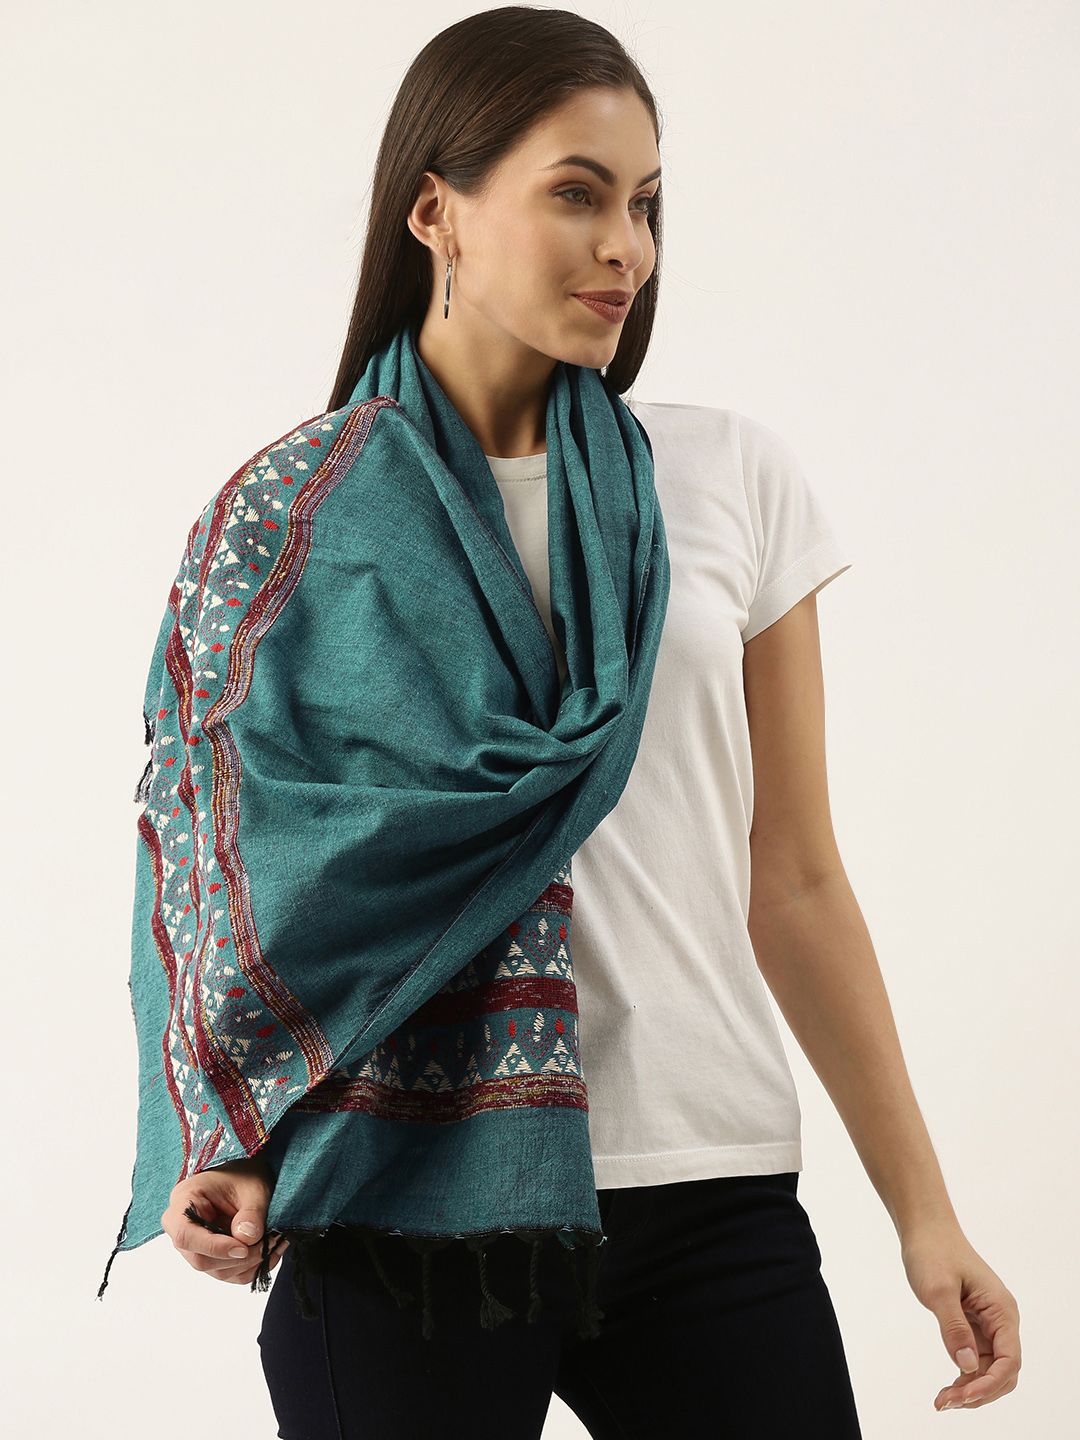 ArtEastri Women Teal & Red Cotton Handloom Khesh Kantha Embroidered Stole Price in India